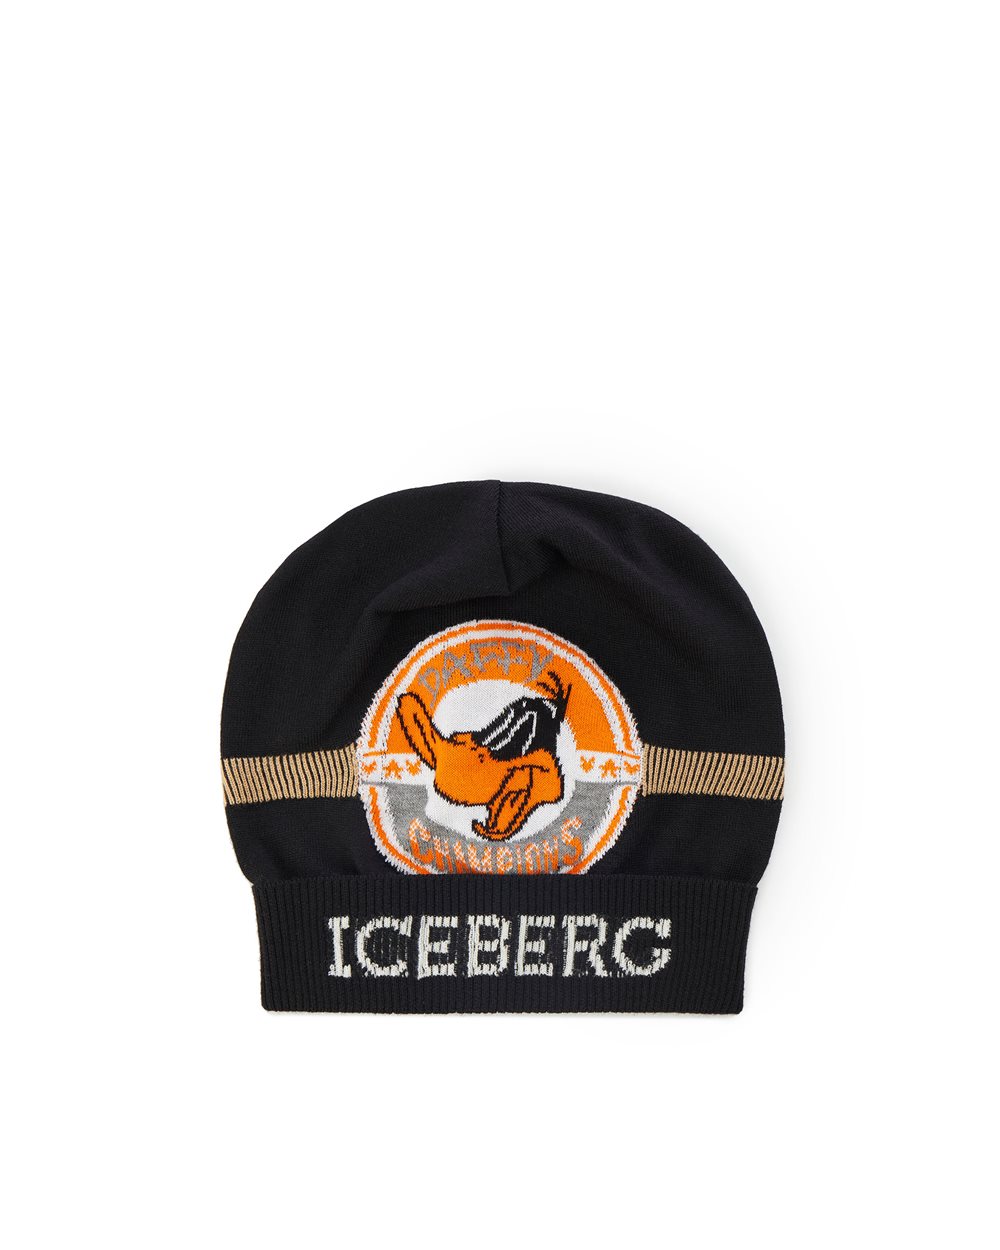 Beanie with cartoon detail and logo -  ( SECONDO STEP US )  PROMO UP TO 50%  | Iceberg - Official Website